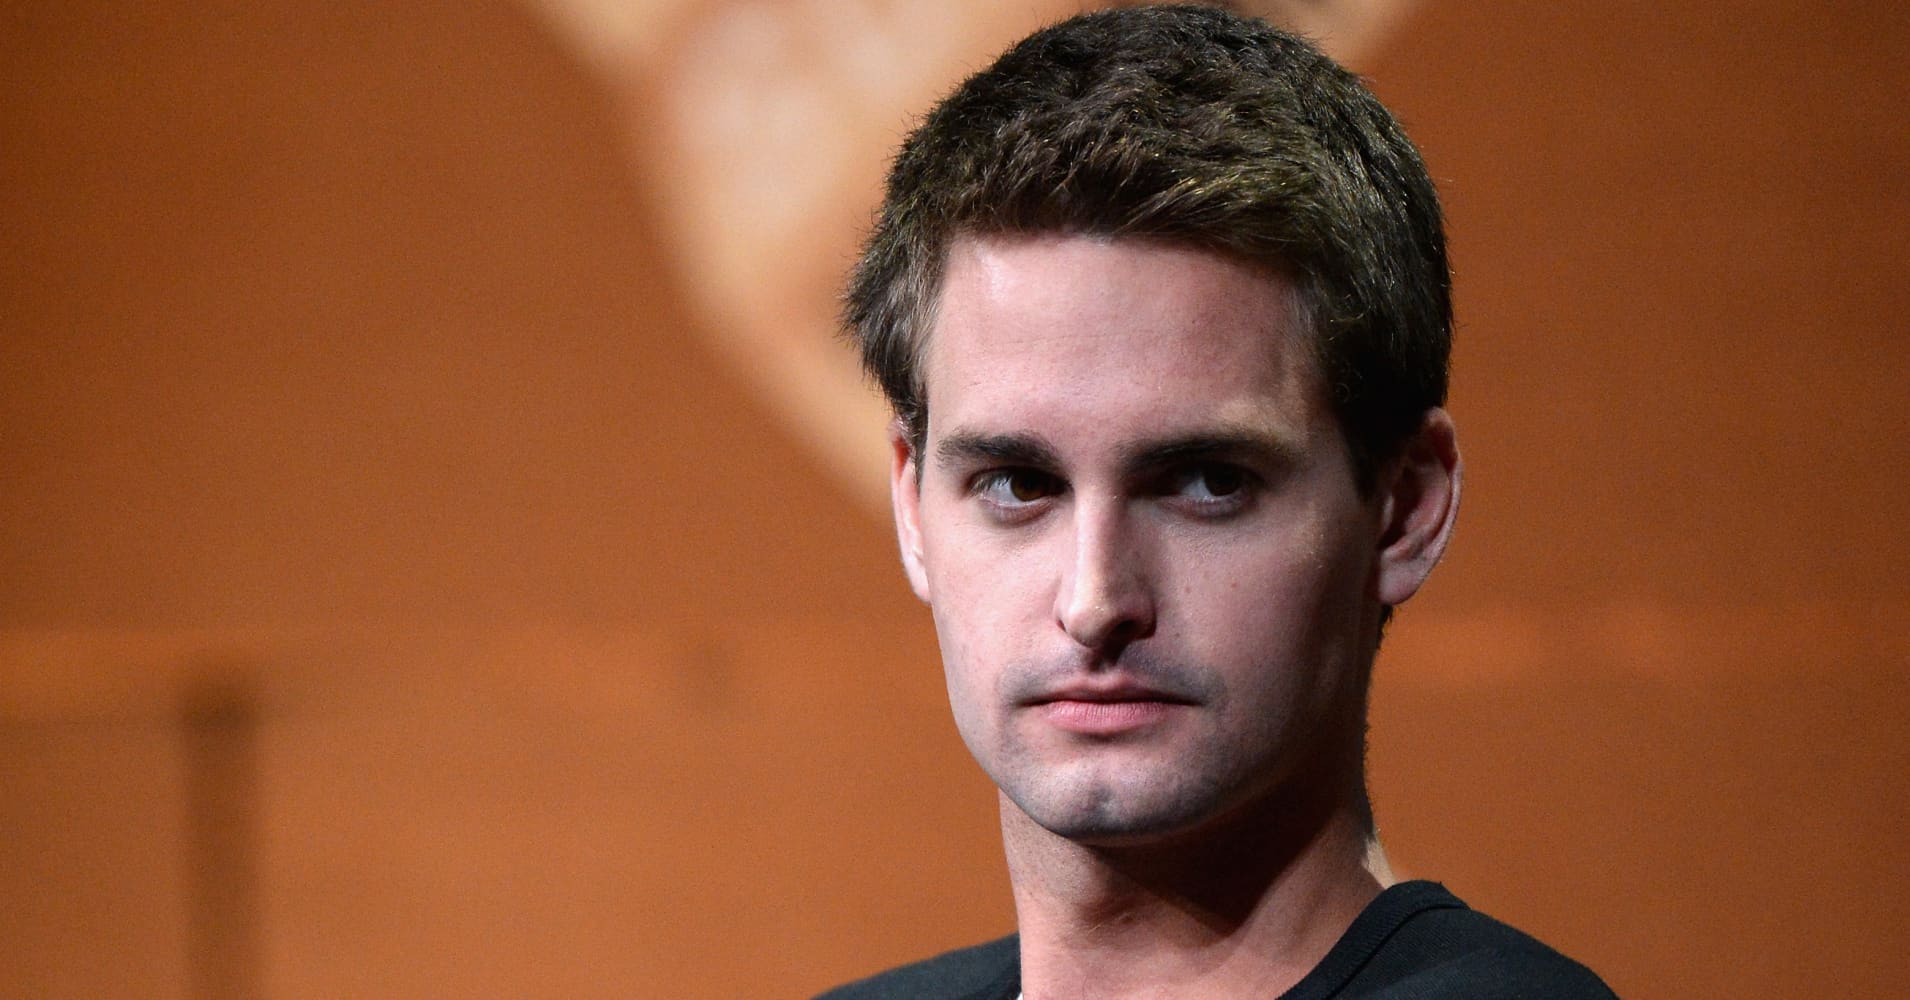 Evan Spiegel, co-founder and CEO of Snapchat